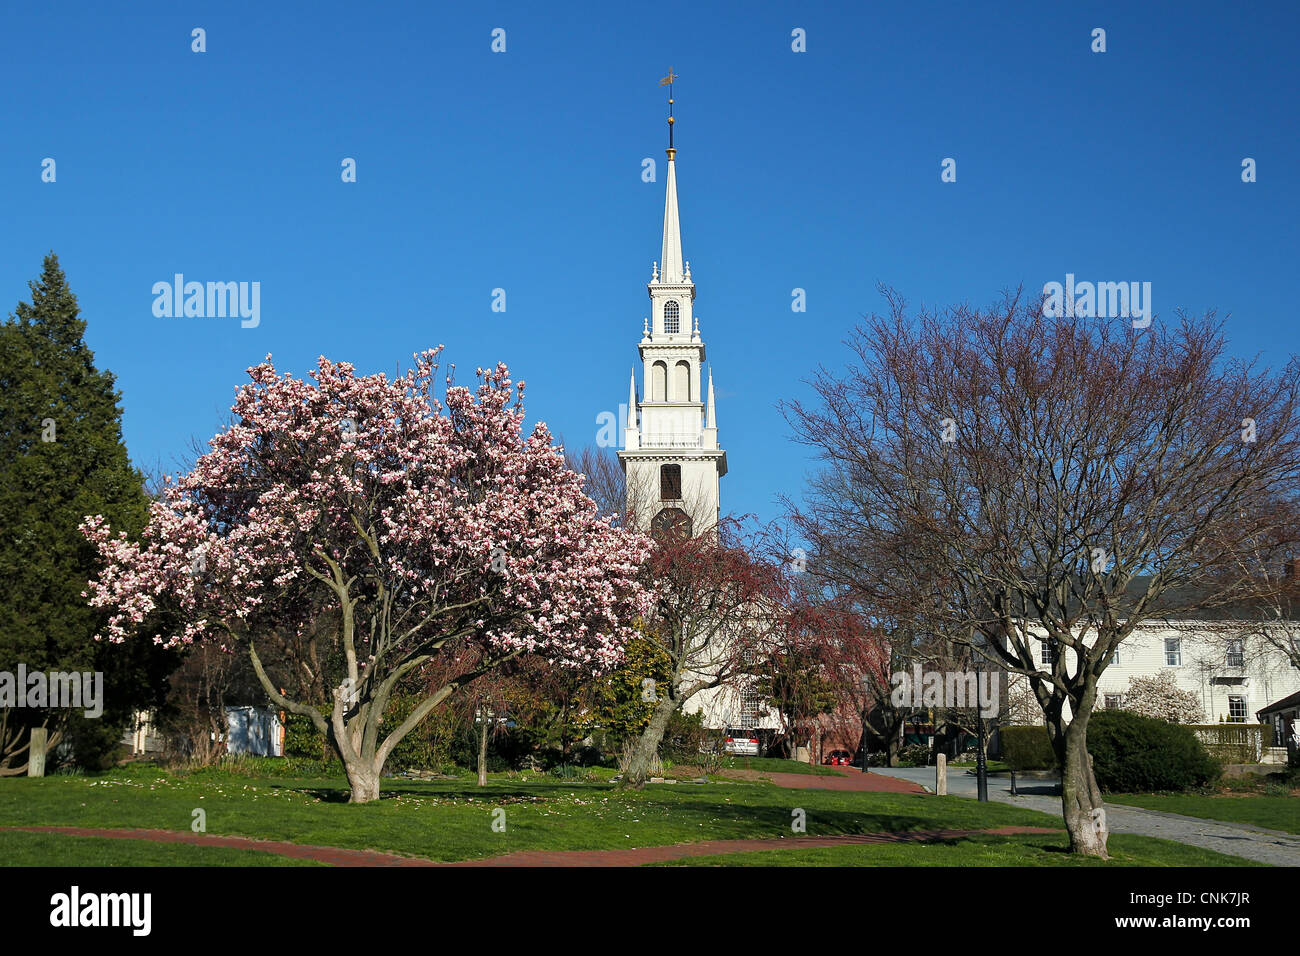 The steeple of Trinity Church (constructed 1725-1726) rises behind a tree flowering in springtime, in Newport, Rhode Island Stock Photo